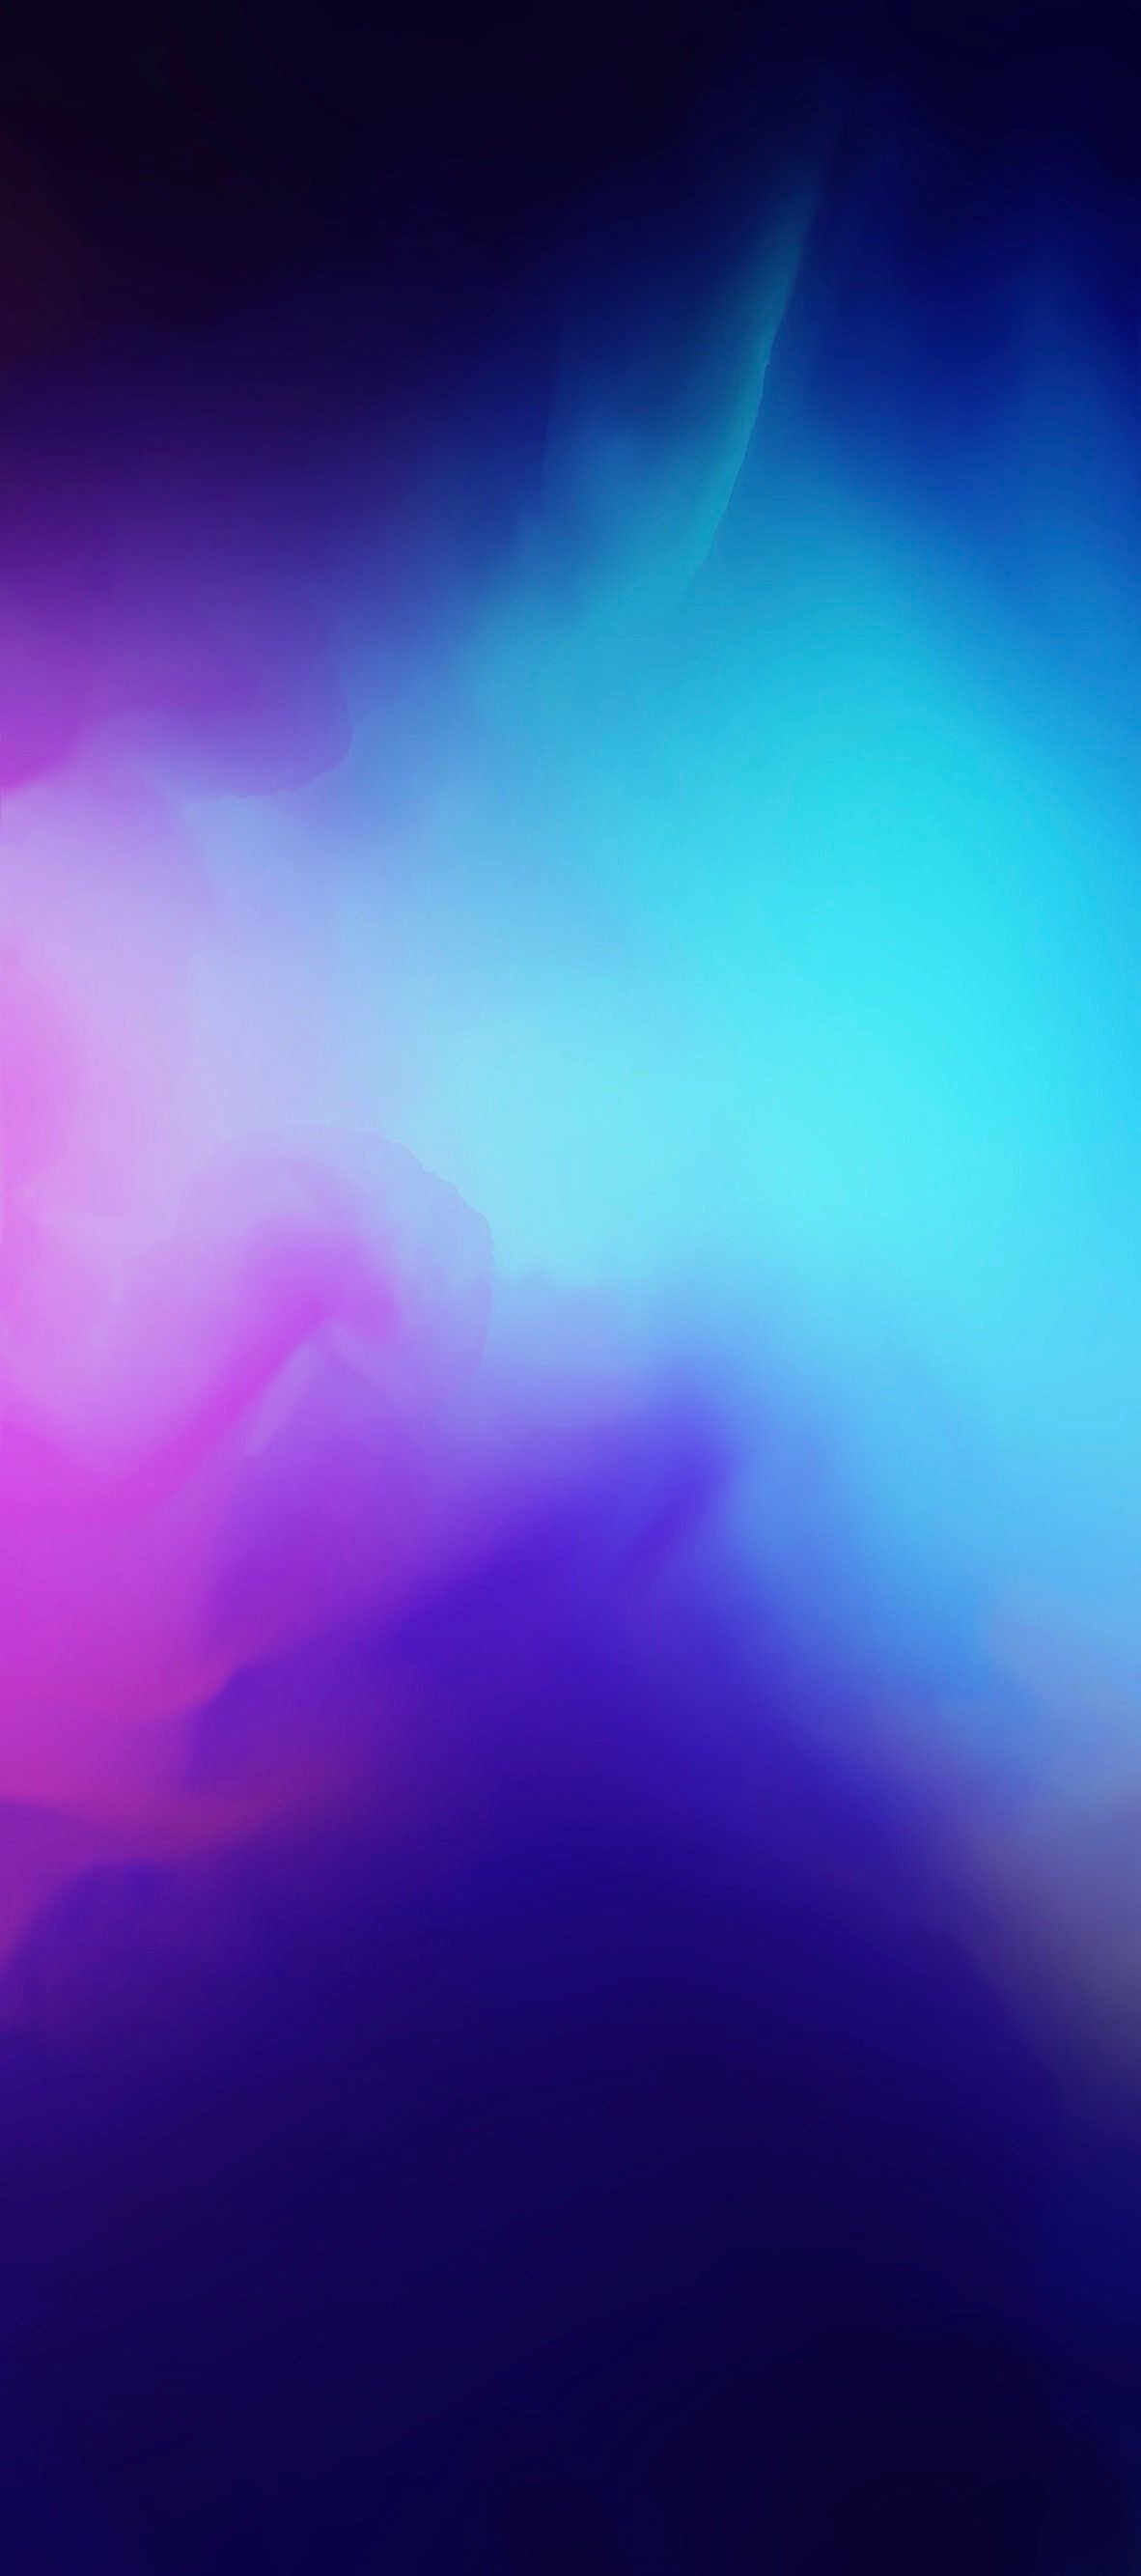 1182x2668, Ios 11, Iphone X, Blue, Purple, Abstract, - Blue And Purple Iphone - HD Wallpaper 